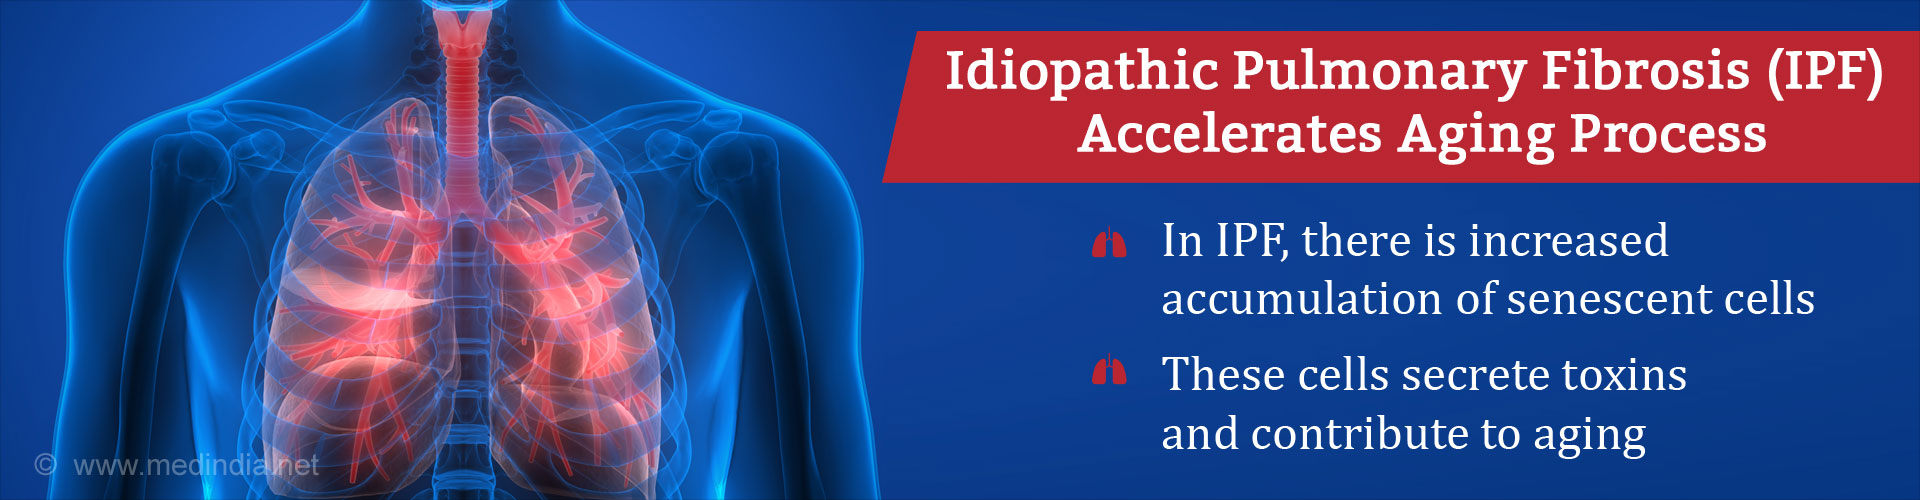 Idiopathic pulmonary fibrosis (IPF) accelerates aging process
- In IPF, there is increased accumulation of senescent cells
- These cells screte toxins and contribute to aging